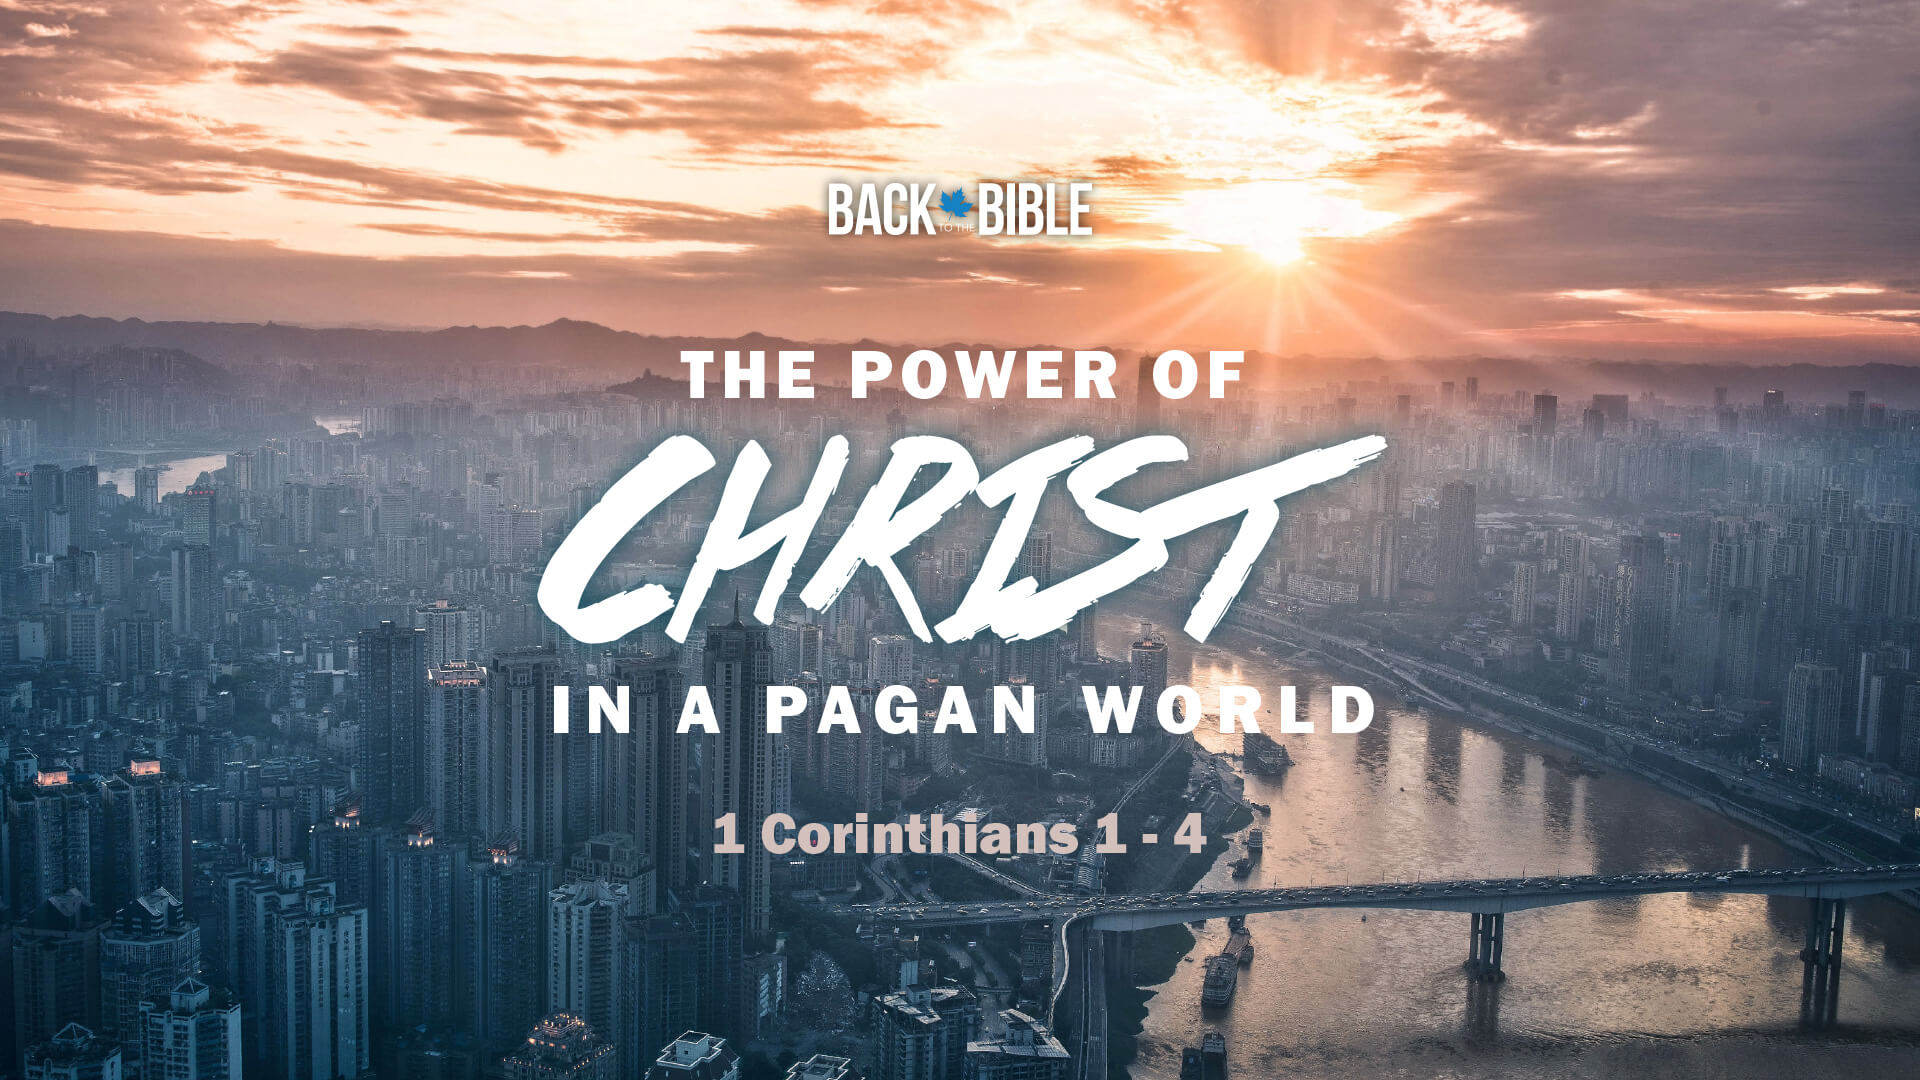 The Power of Christ in a Pagan World by Dr. John Neufeld - Back to the Bible Canada